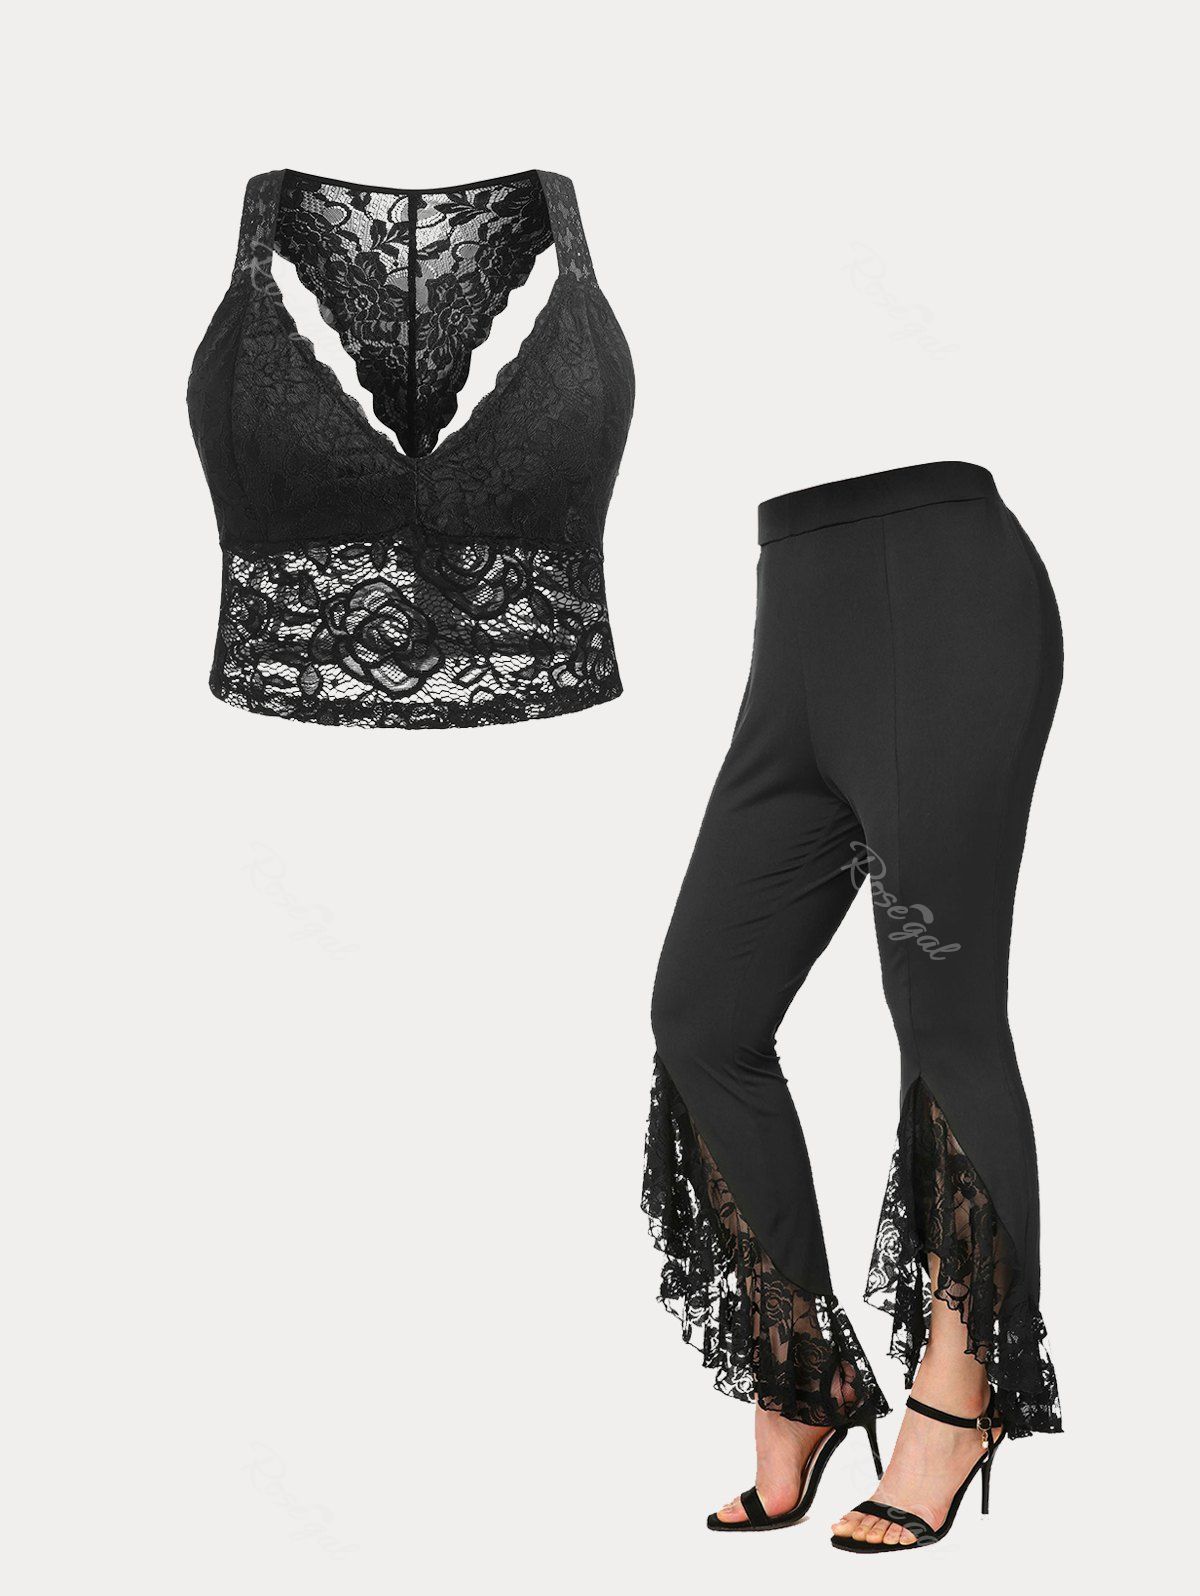 Affordable Plunge Lace Bra Top and Slit Bell Bottom Pants Plus Size Summer Festival Outfit  